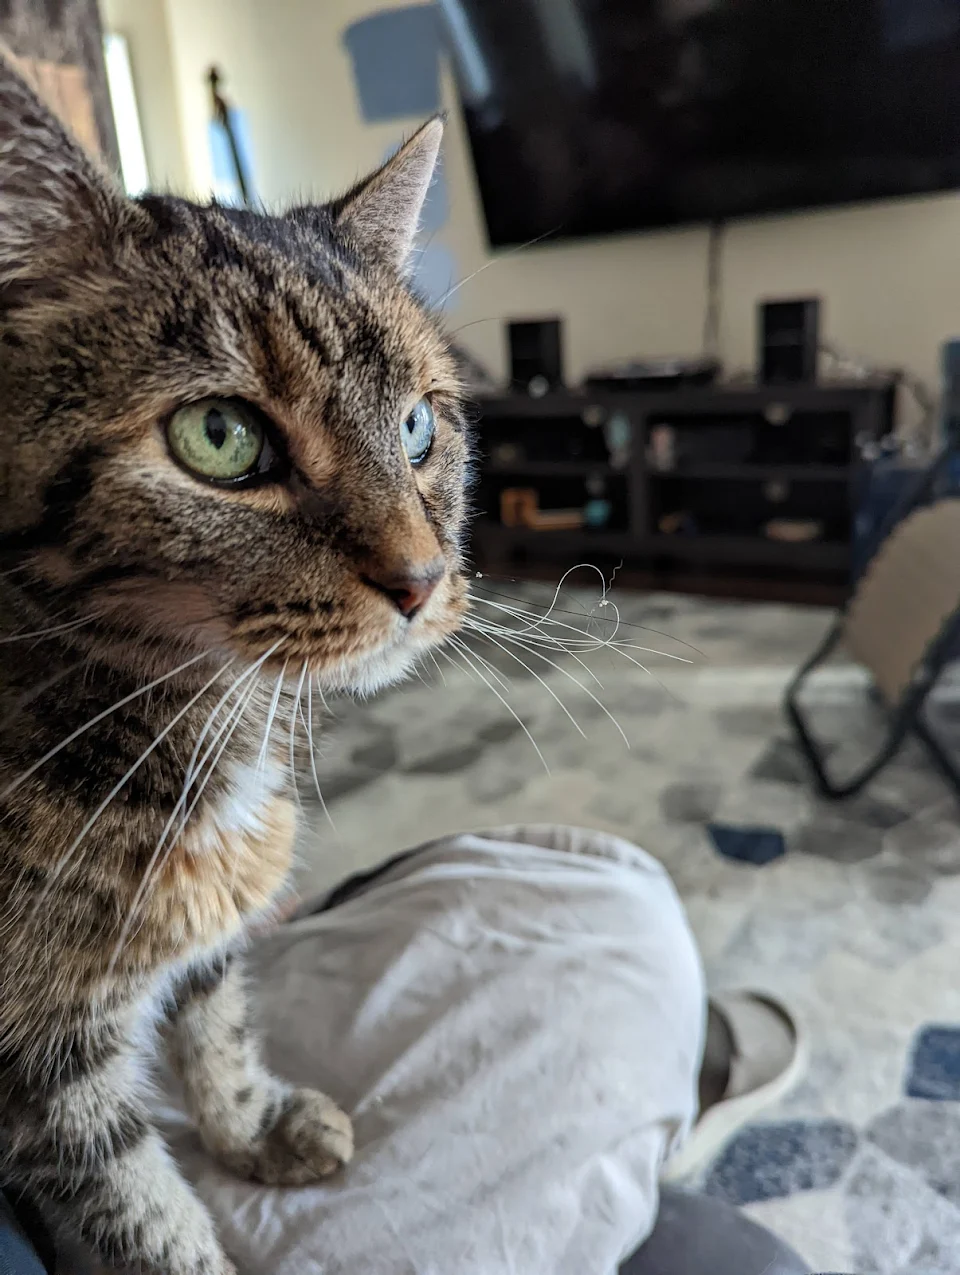 Love this cat. She's been with my wife for 22 years and after the last 8 of living with me finally started sitting on my lap. We let her outside with us in our fenced yard and she got her little whiskers tangled.